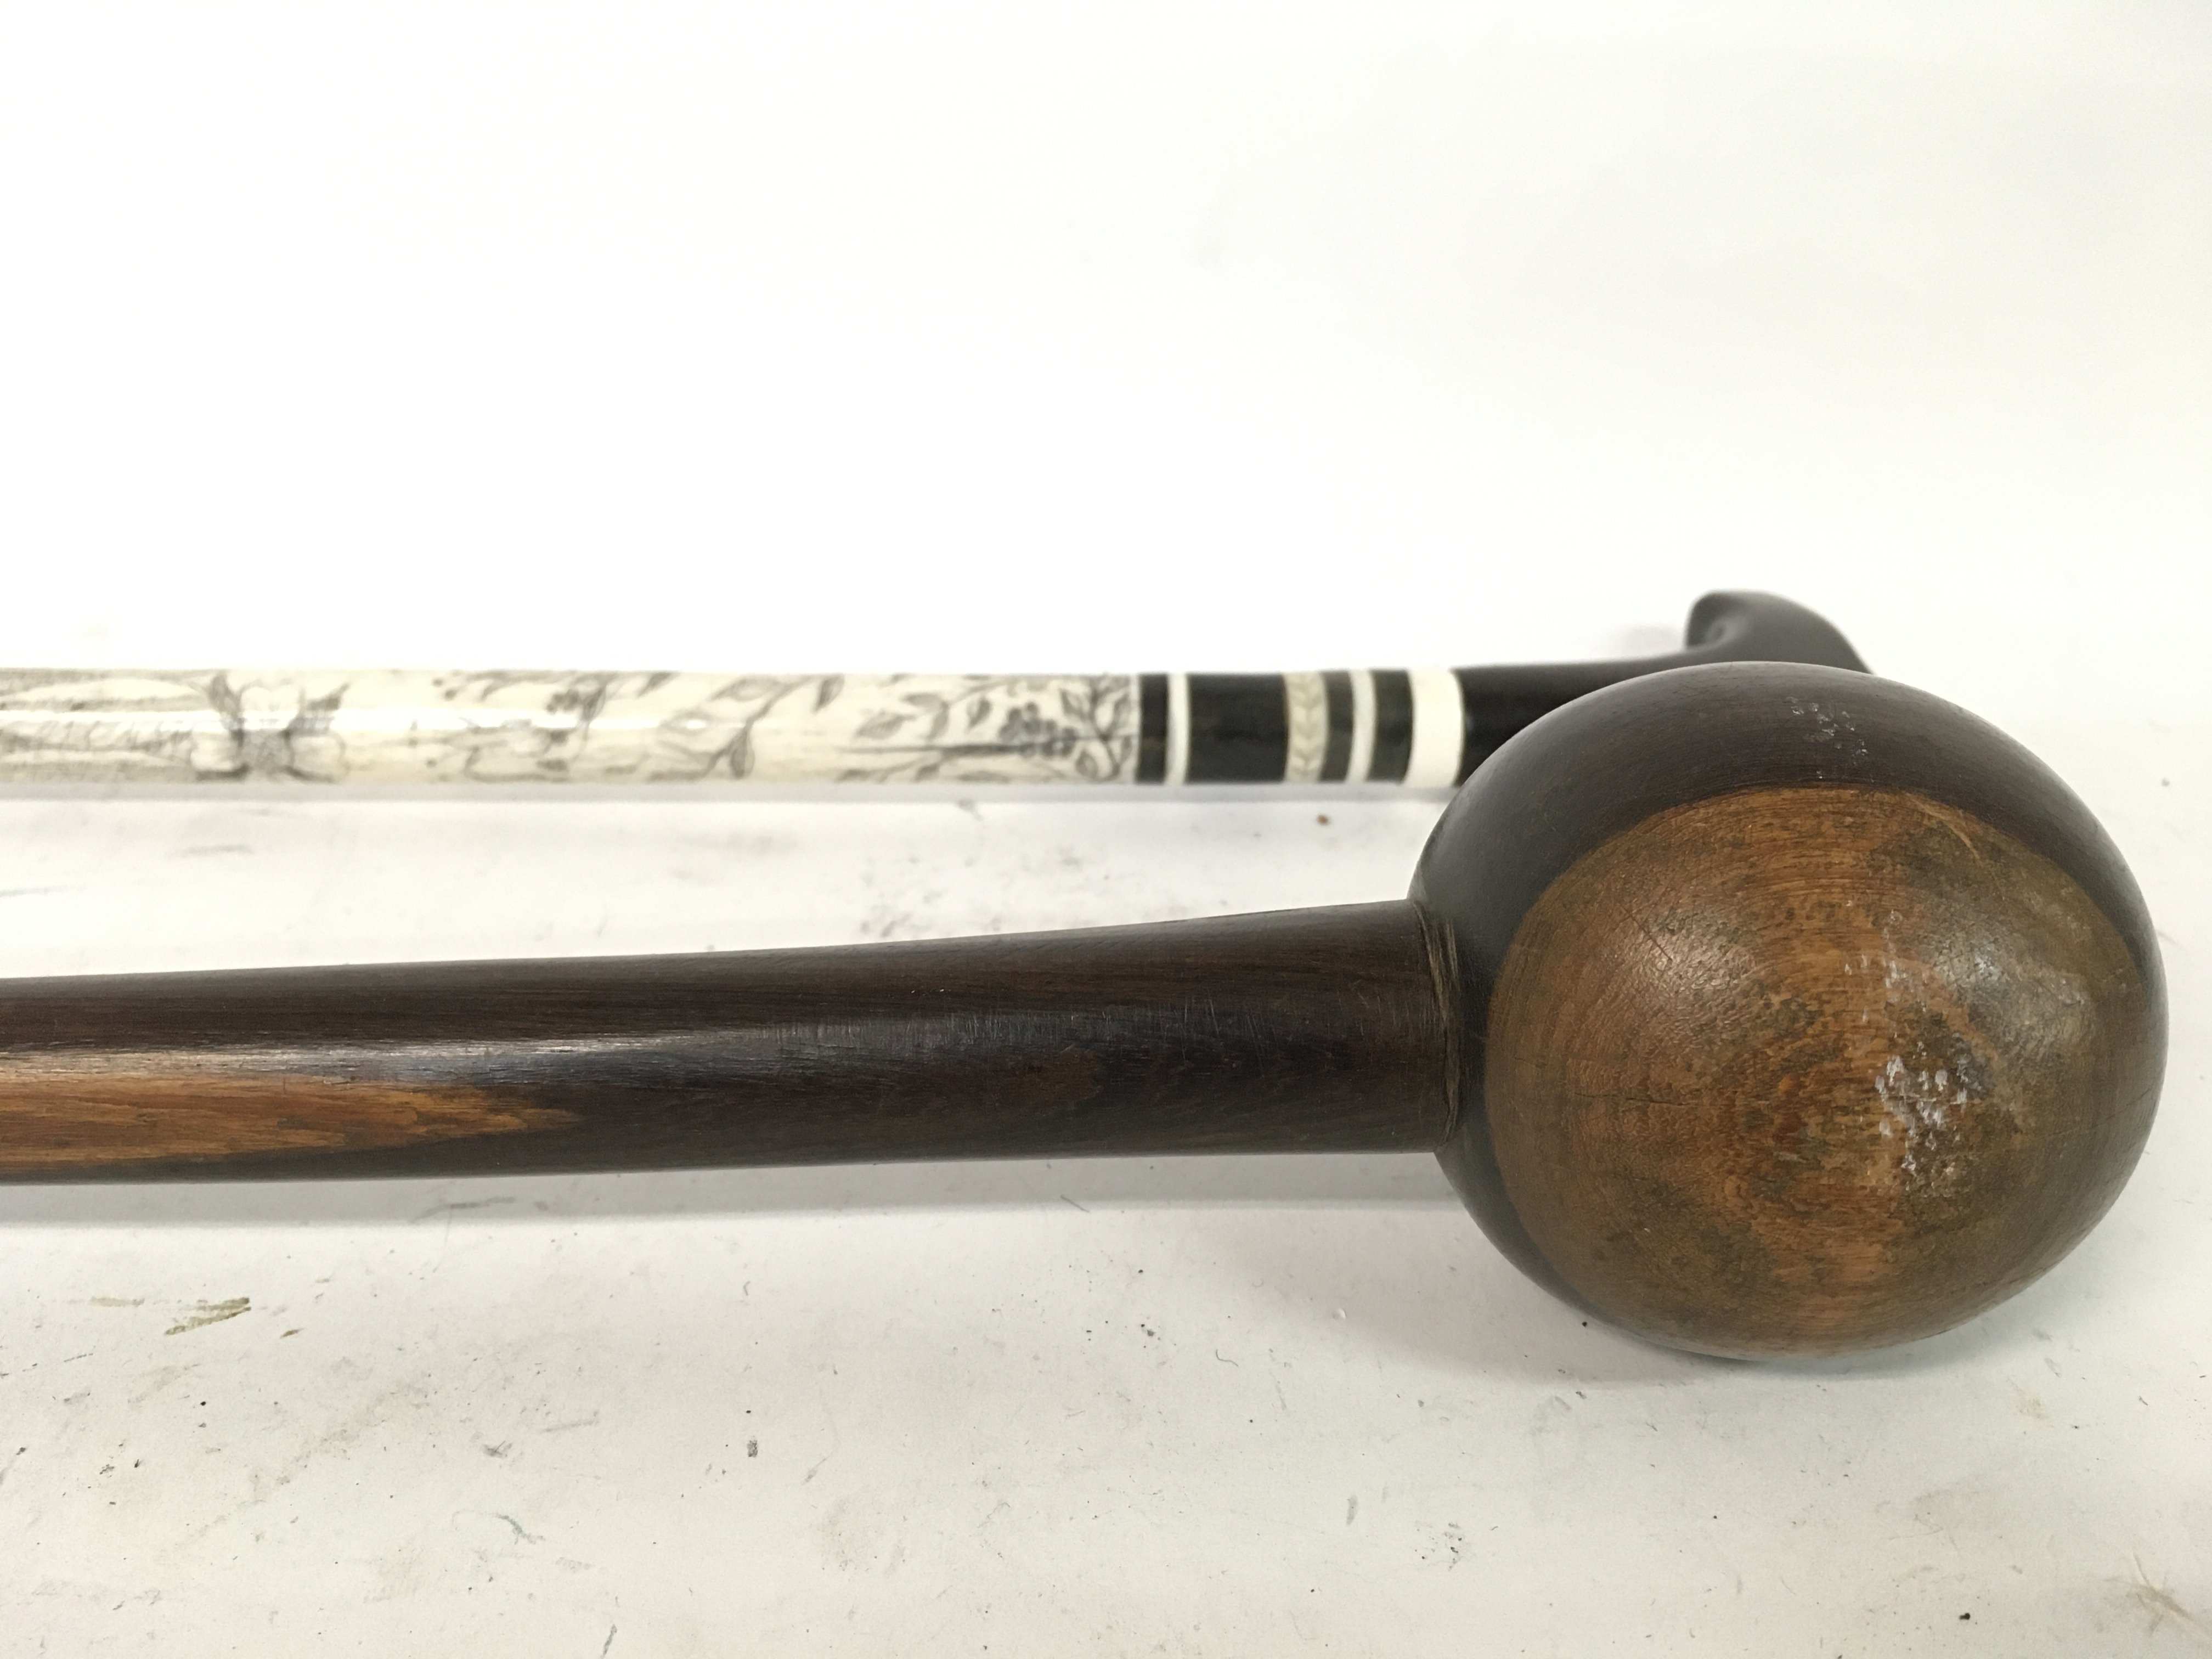 Zulu Knobkerry & walking cane rosewood handle and - Image 2 of 4